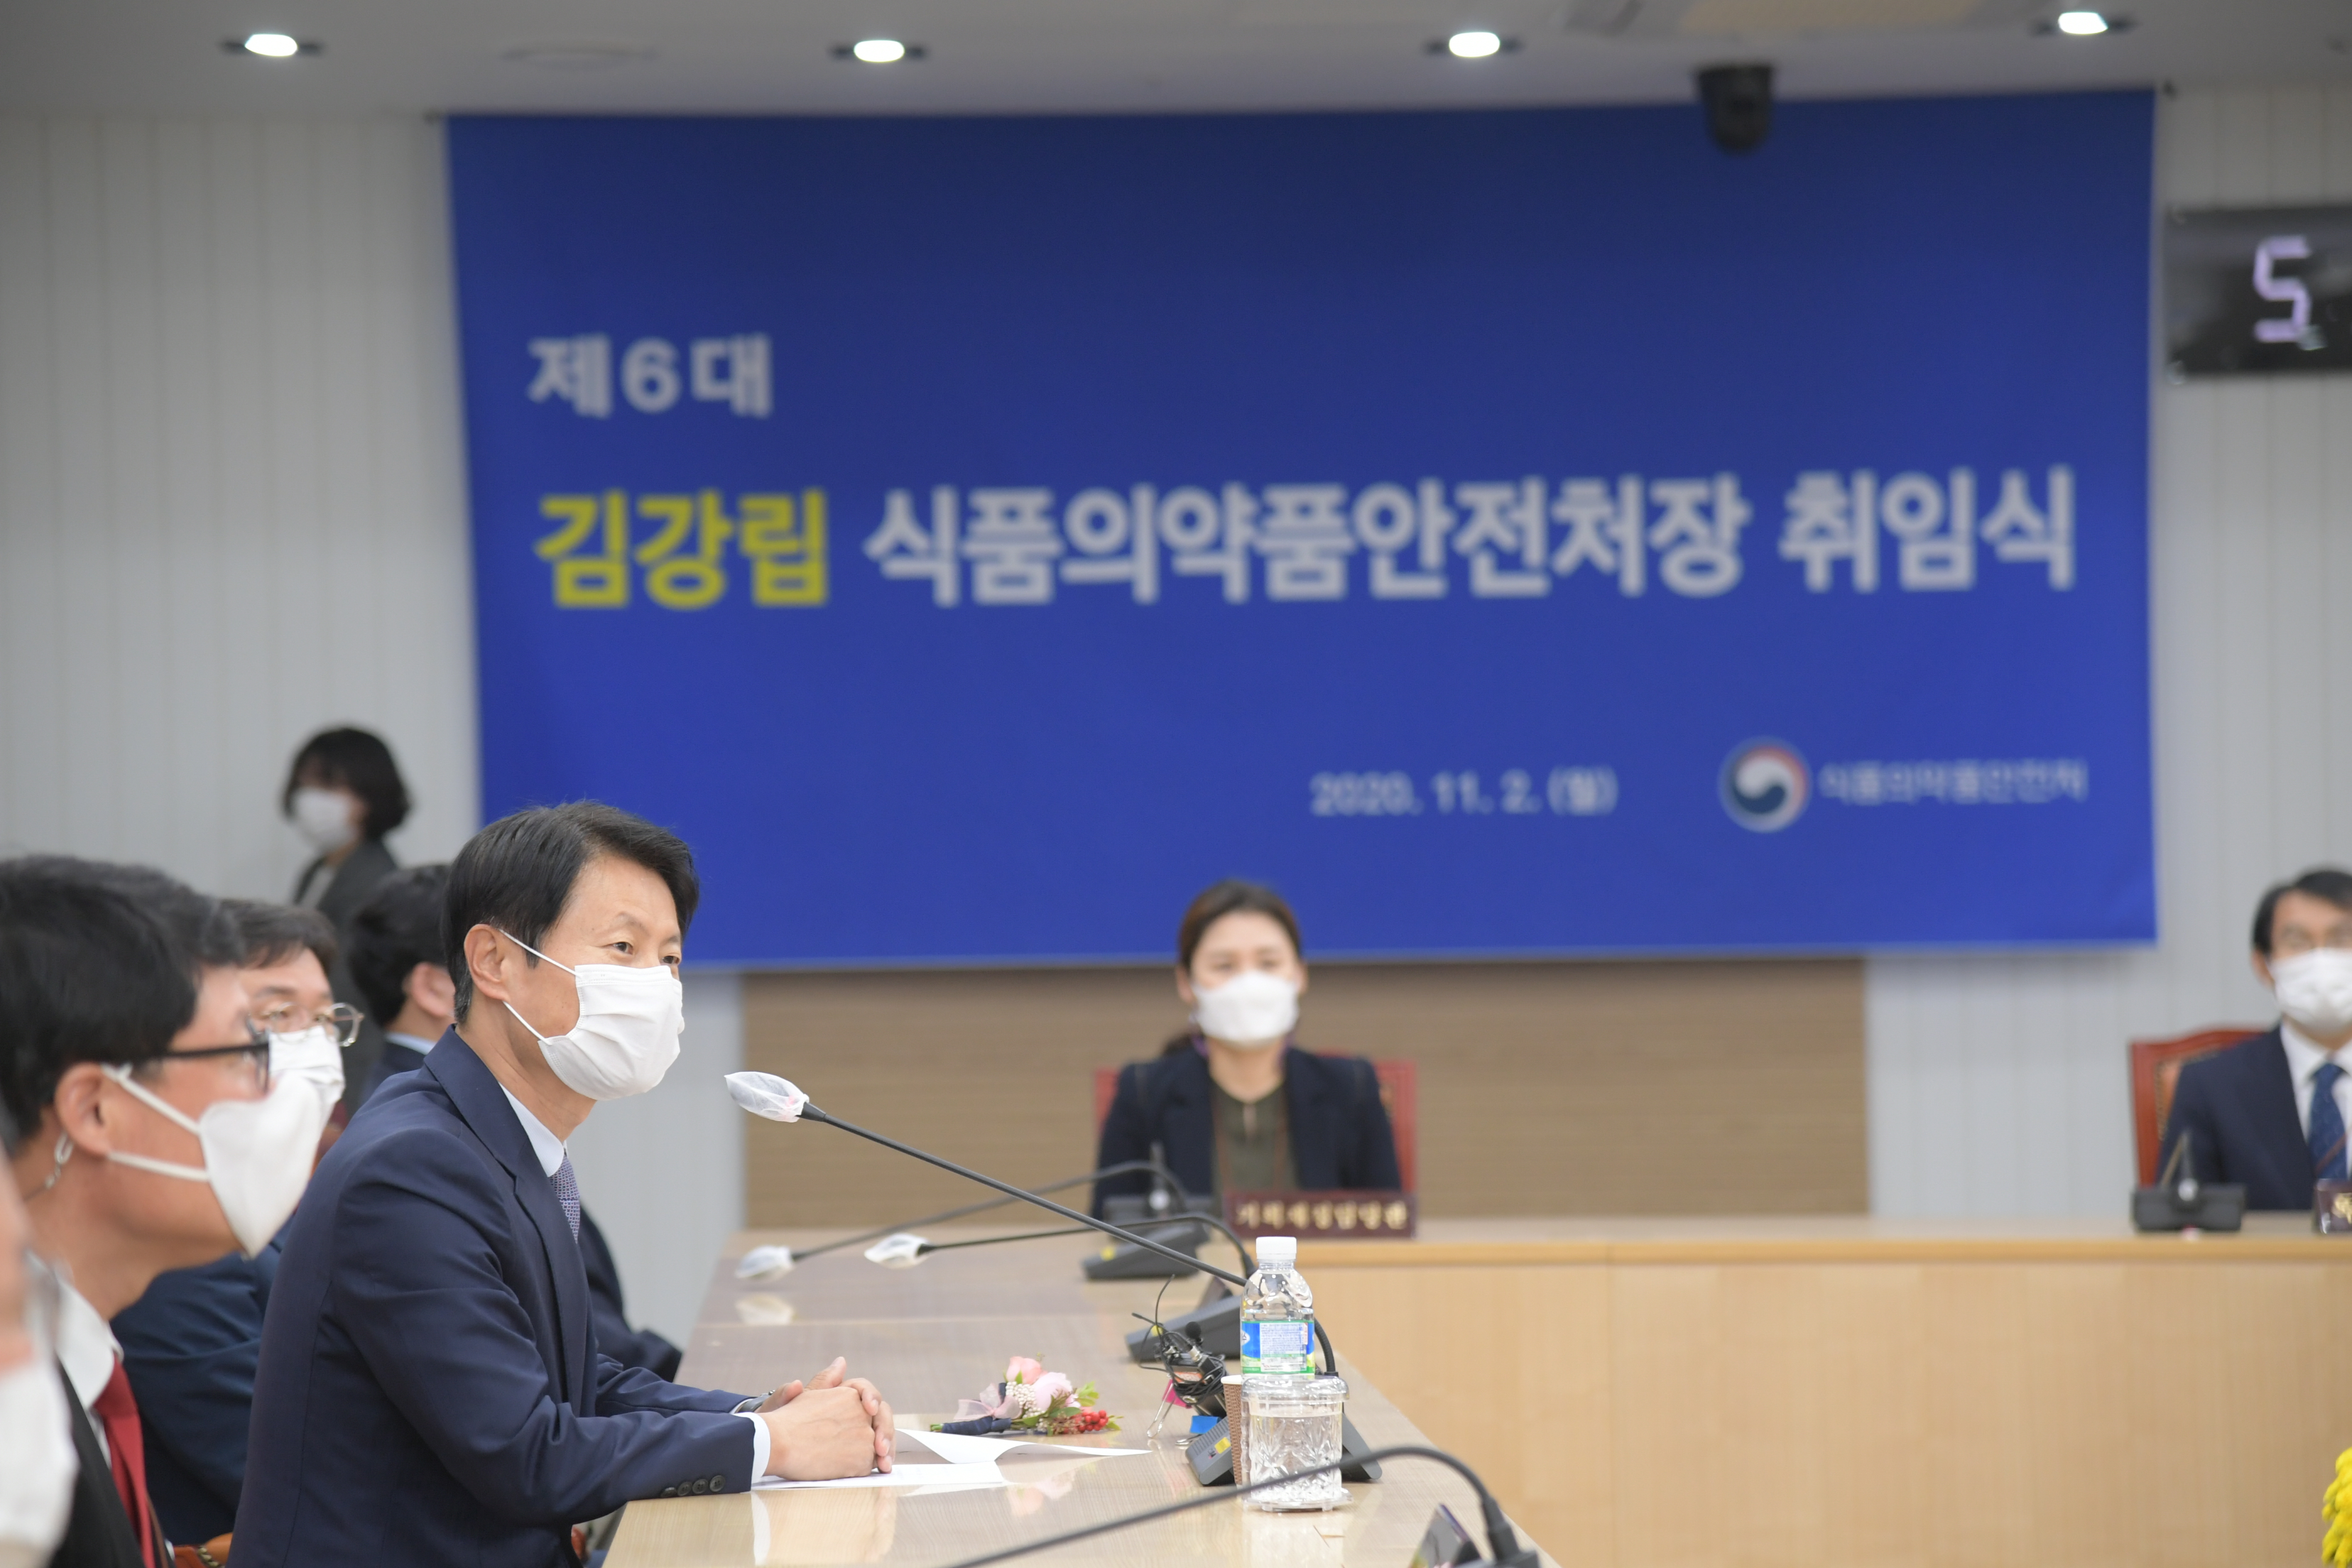 Photo News4 - [Nov. 2, 2020] Inauguration of Minister Kim Ganglip as the 6th Minister of Food and Drug Safety